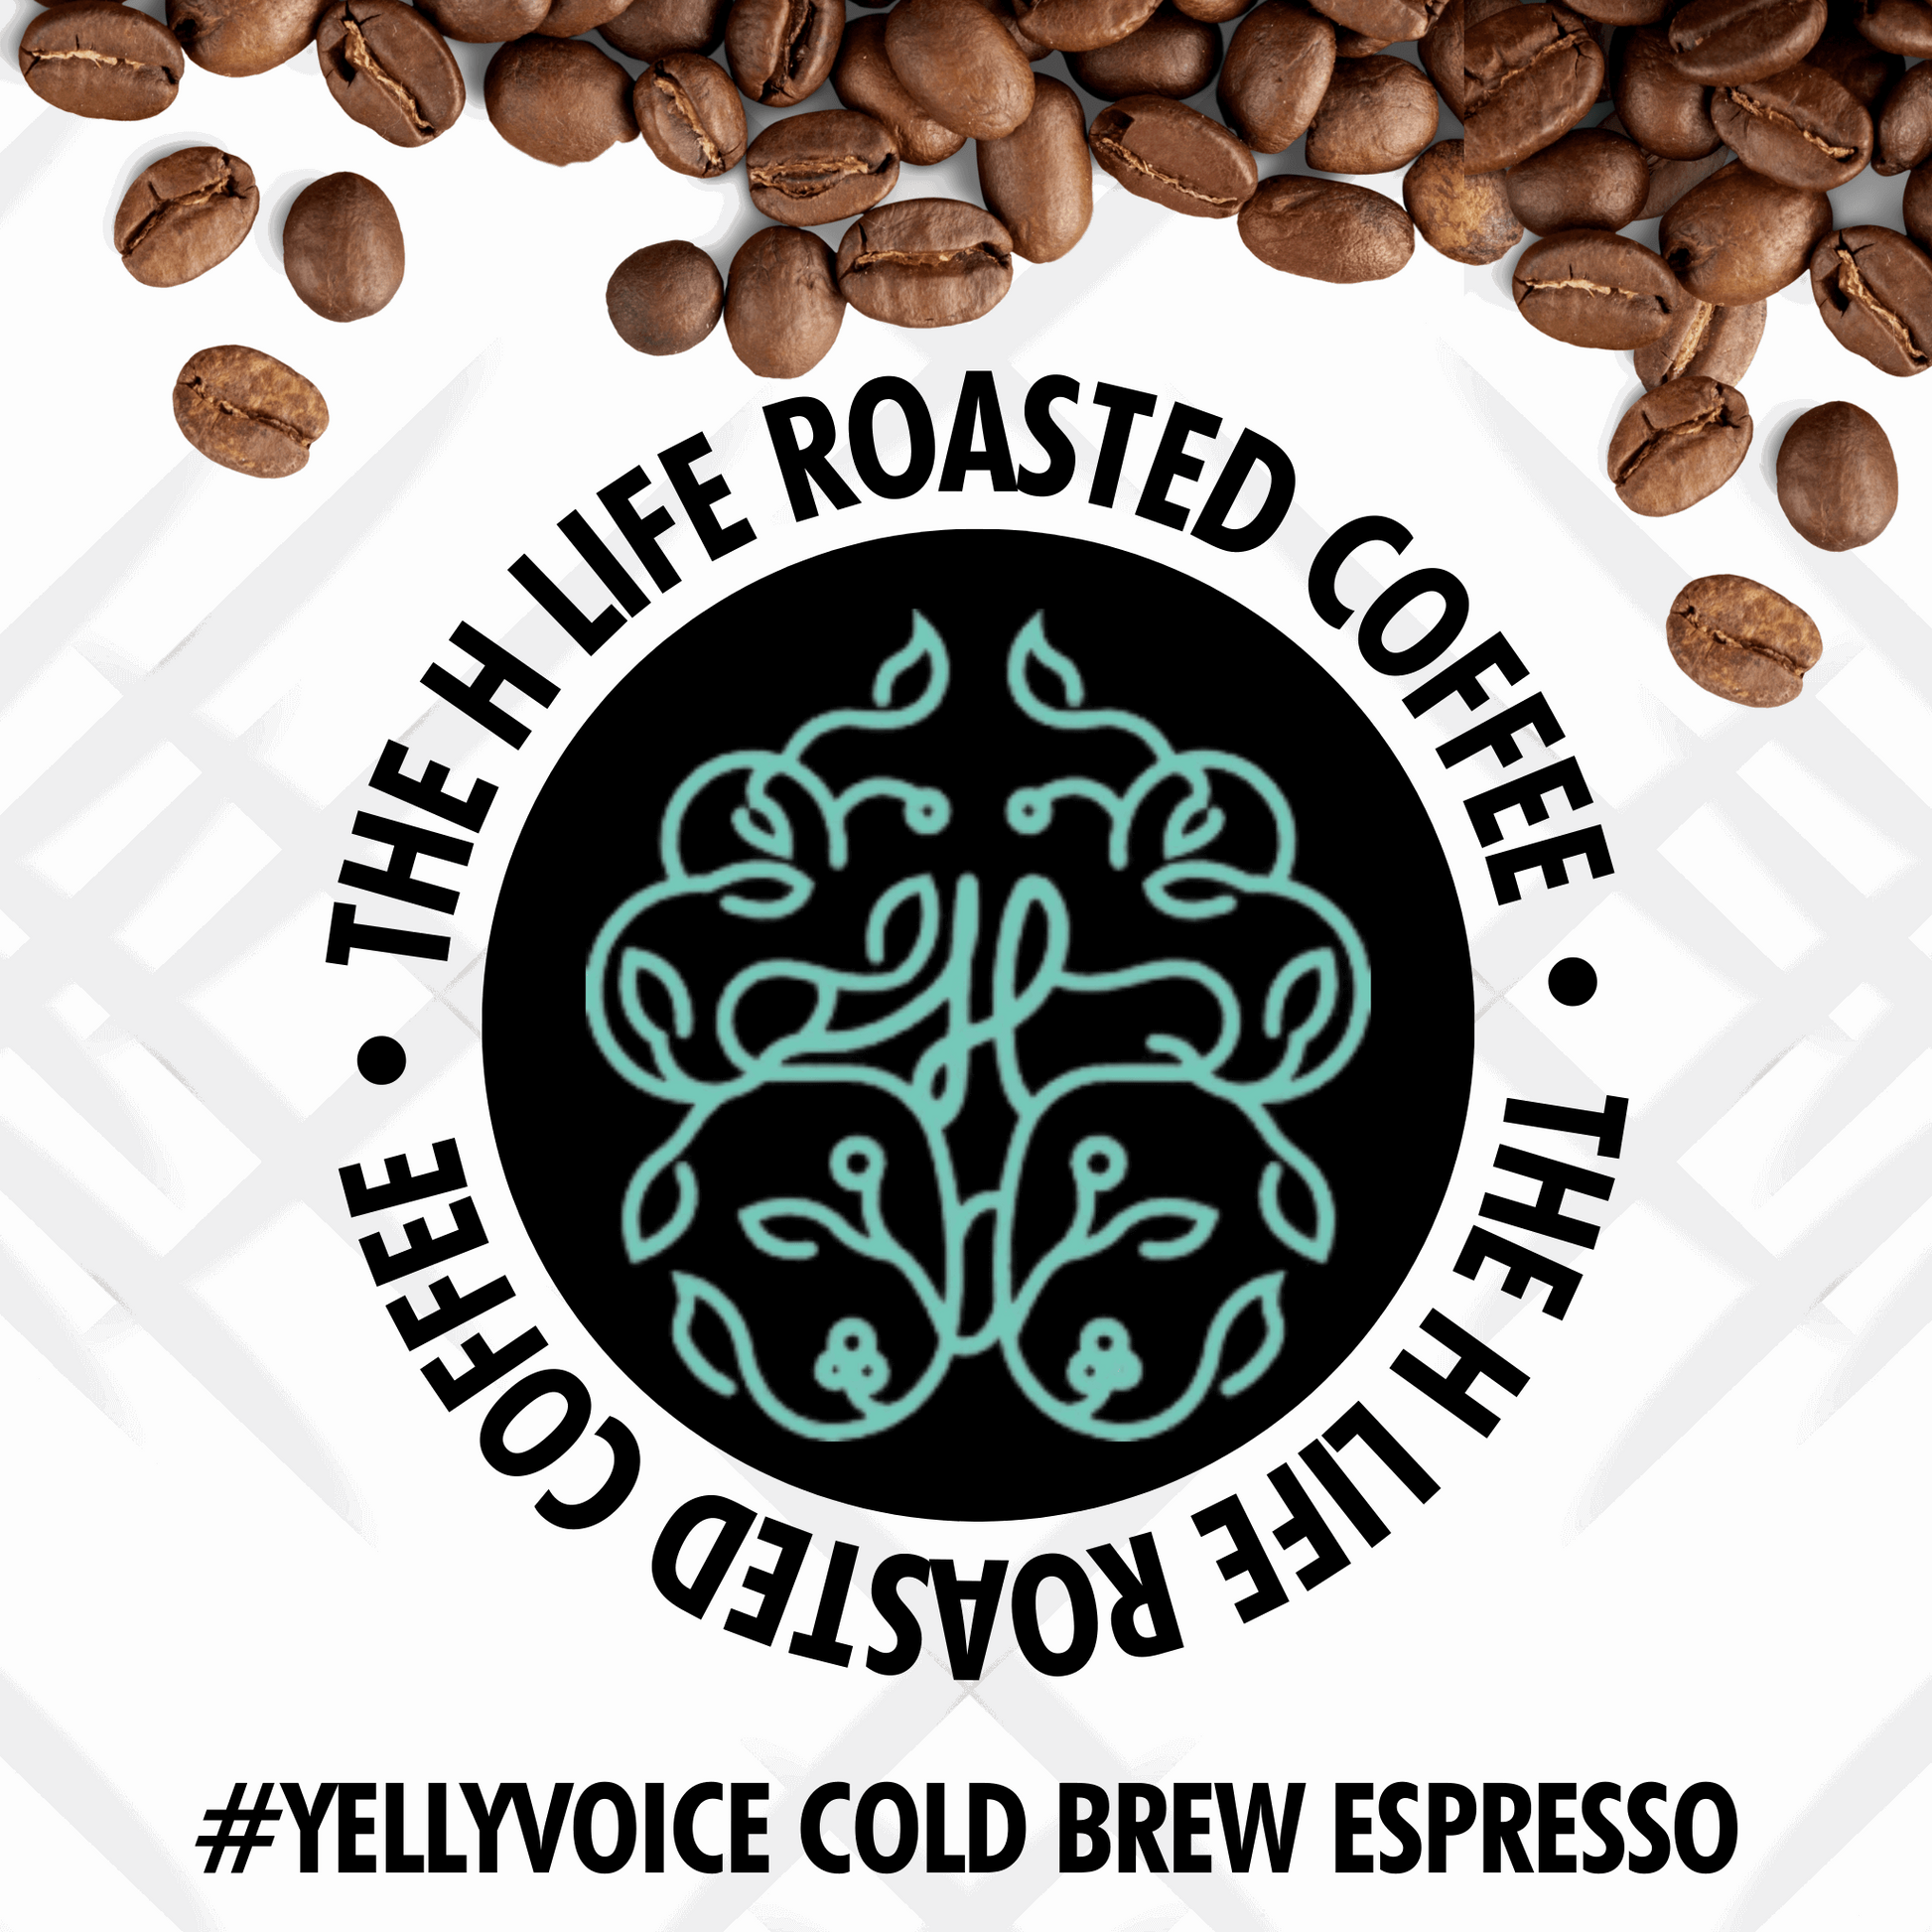 On a white textured background there are coffee beans spilling from the top and The H Life brain logo in the center. The H Life Roasted Coffee lineup highlighting the #YellyVoice Cold Brew Espresso product.